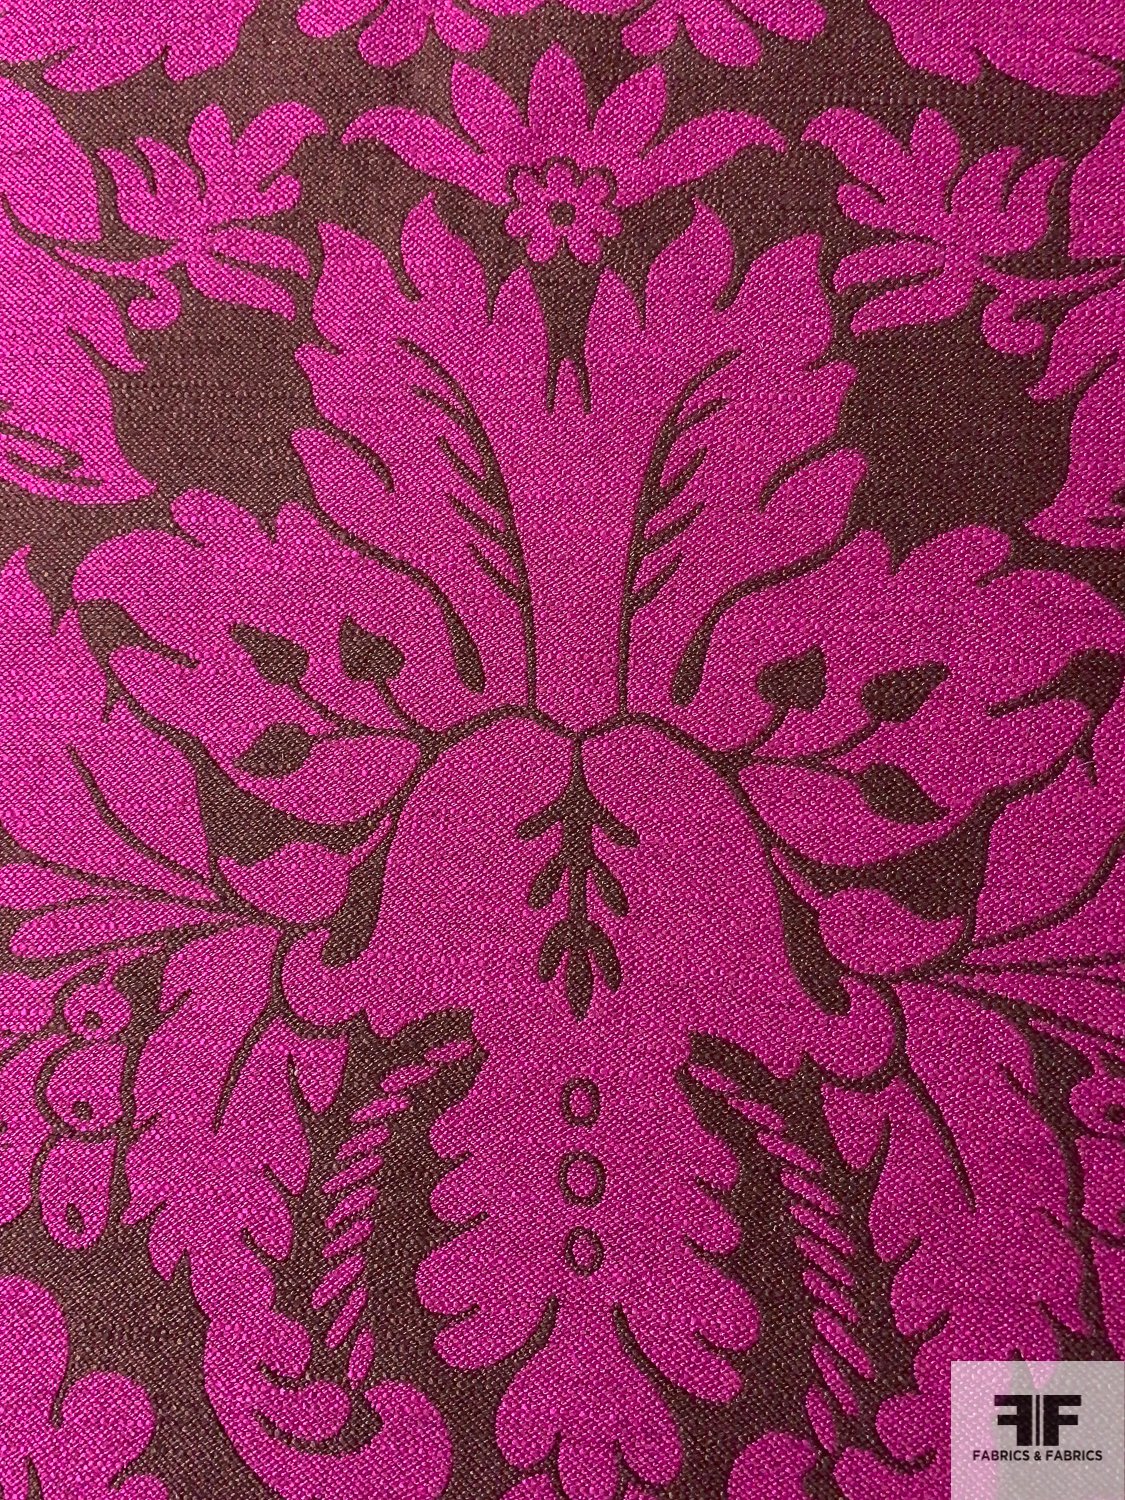 Italian LargeScale Damask Reversible Upholstery-Weight Suiting - Magenta / Brown